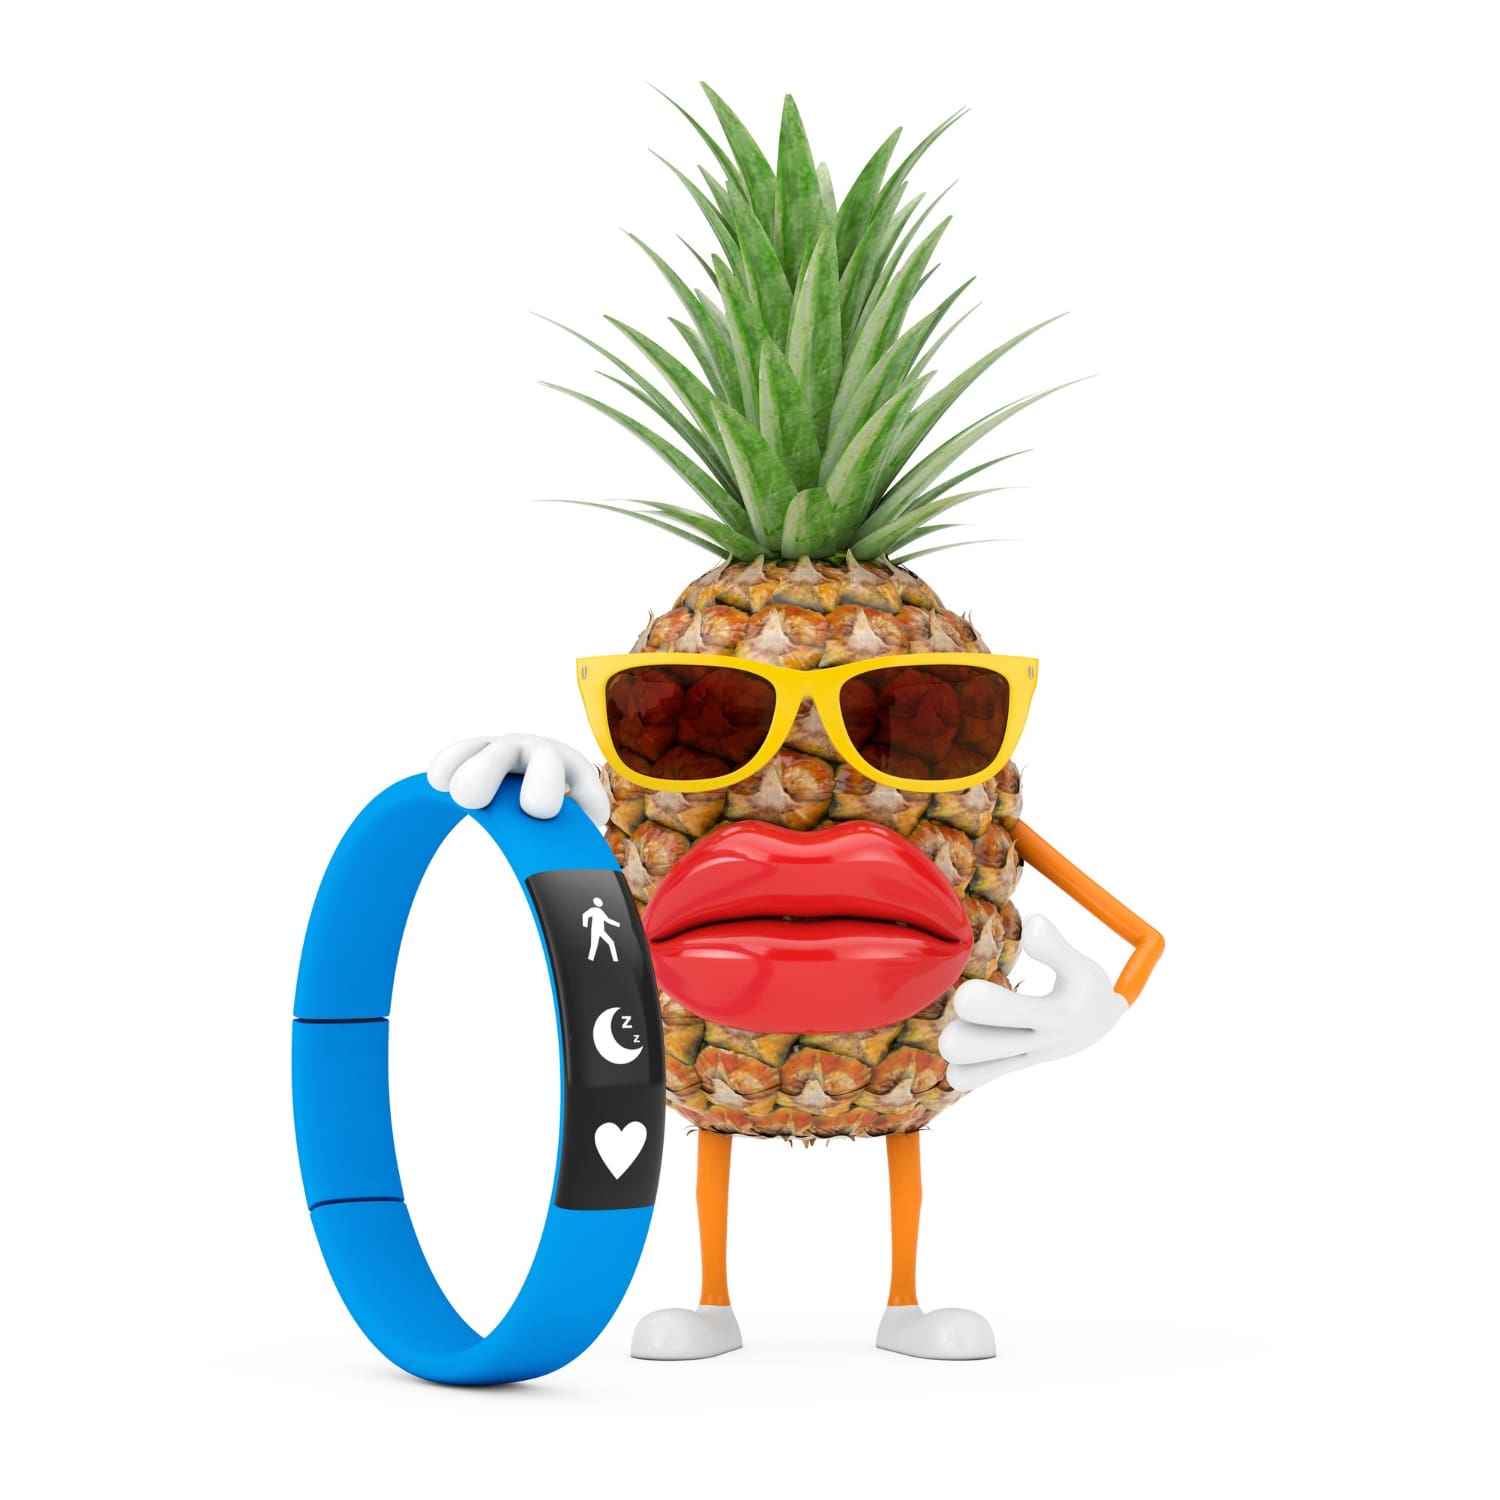 fun-cartoon-fashion-hipster-cut-pineapple-person-character-mascot-with-blue-fitness-tracker-white-background-3d-rendering